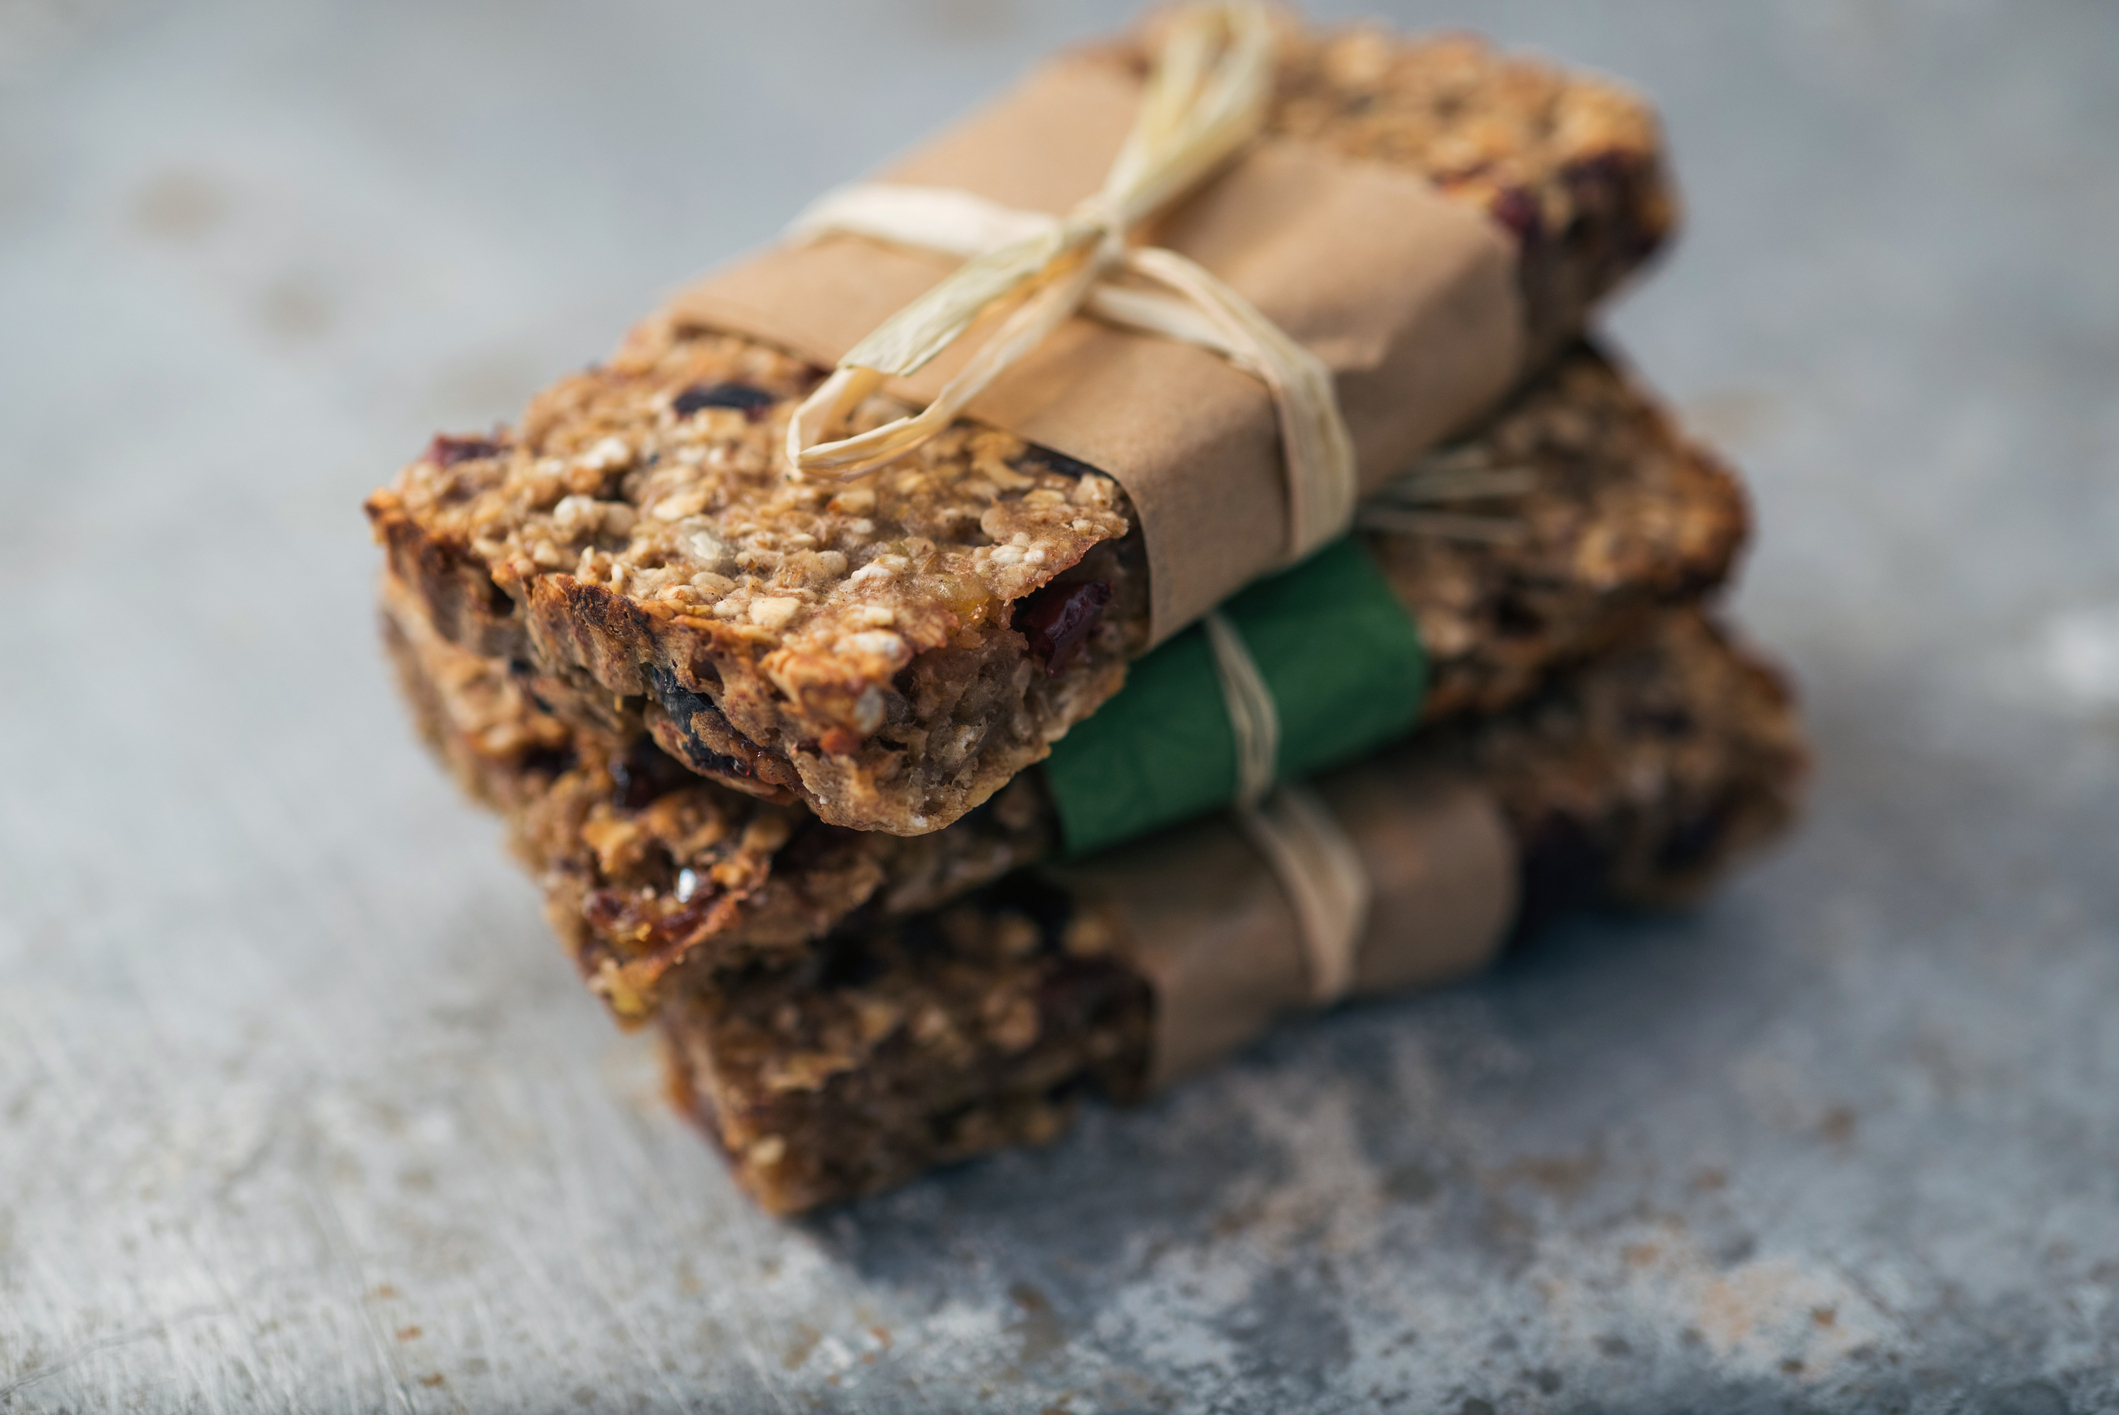 How to Pick the Right Protein Bar